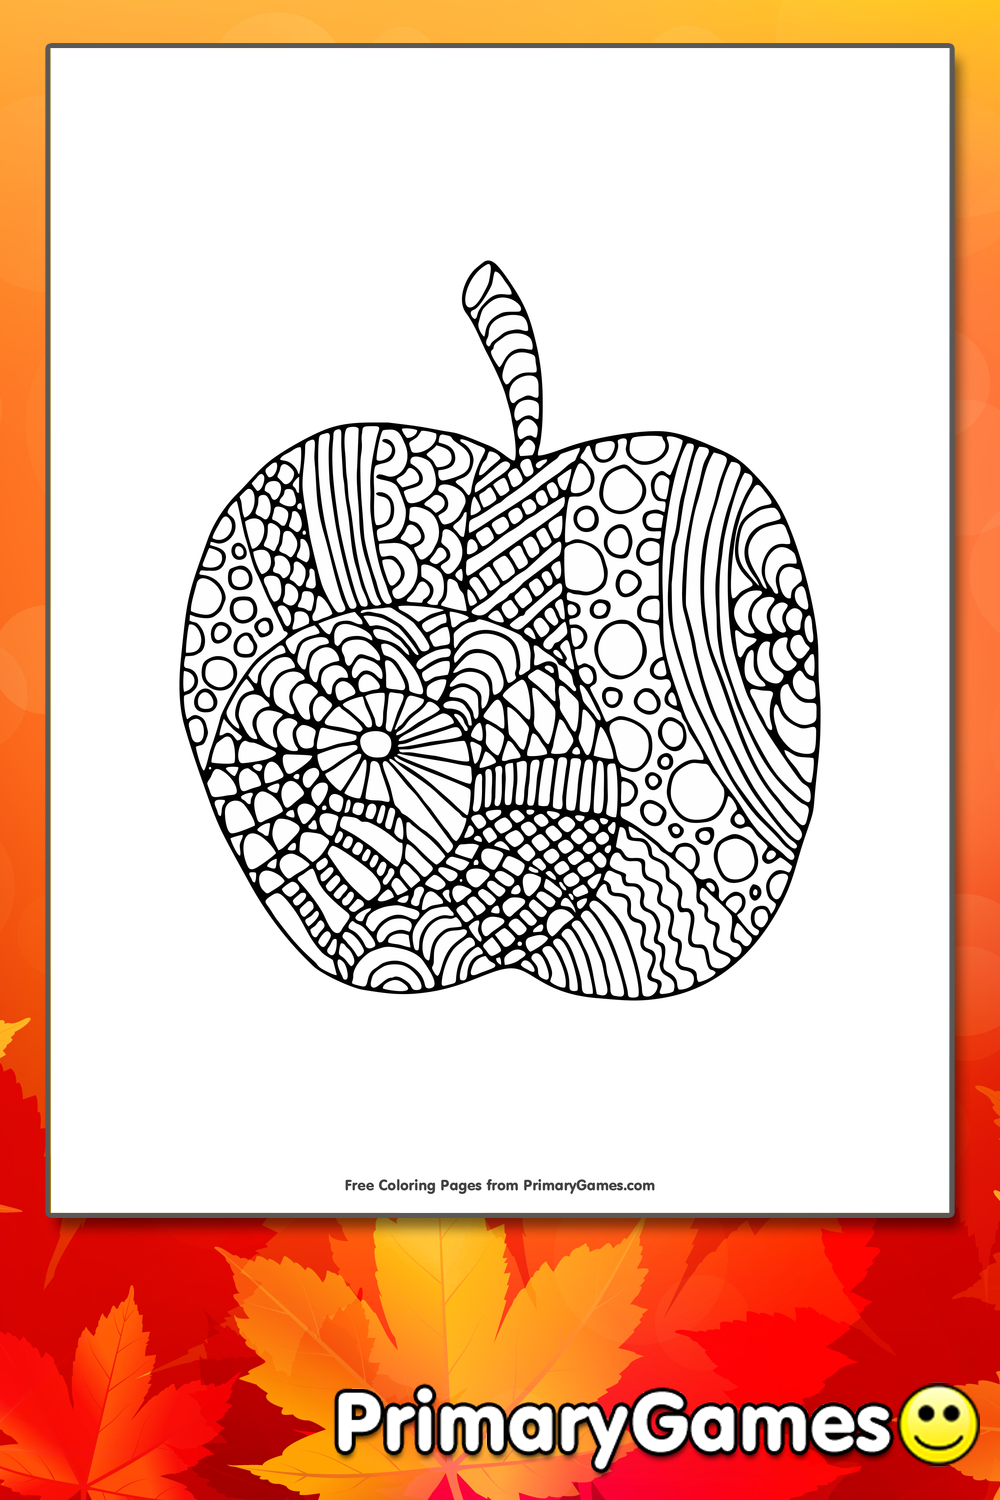 apple computer coloring pages